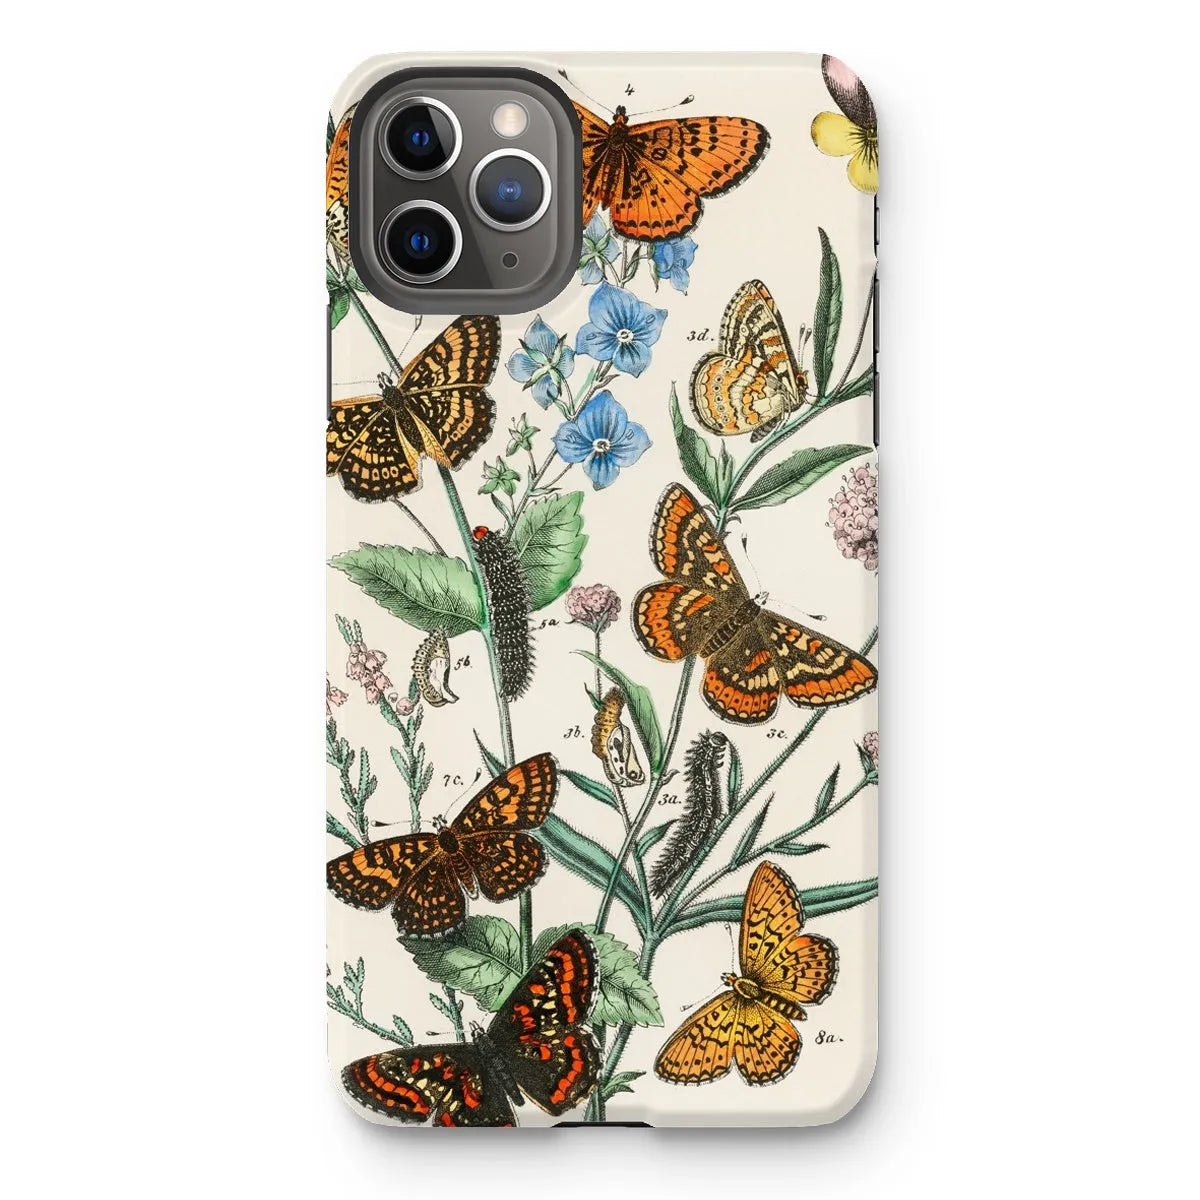 European Butterflies And Moths 2 Art Phone Case - William Forsell Kirby - Iphone 11 Pro Max / Matte - Mobile Phone